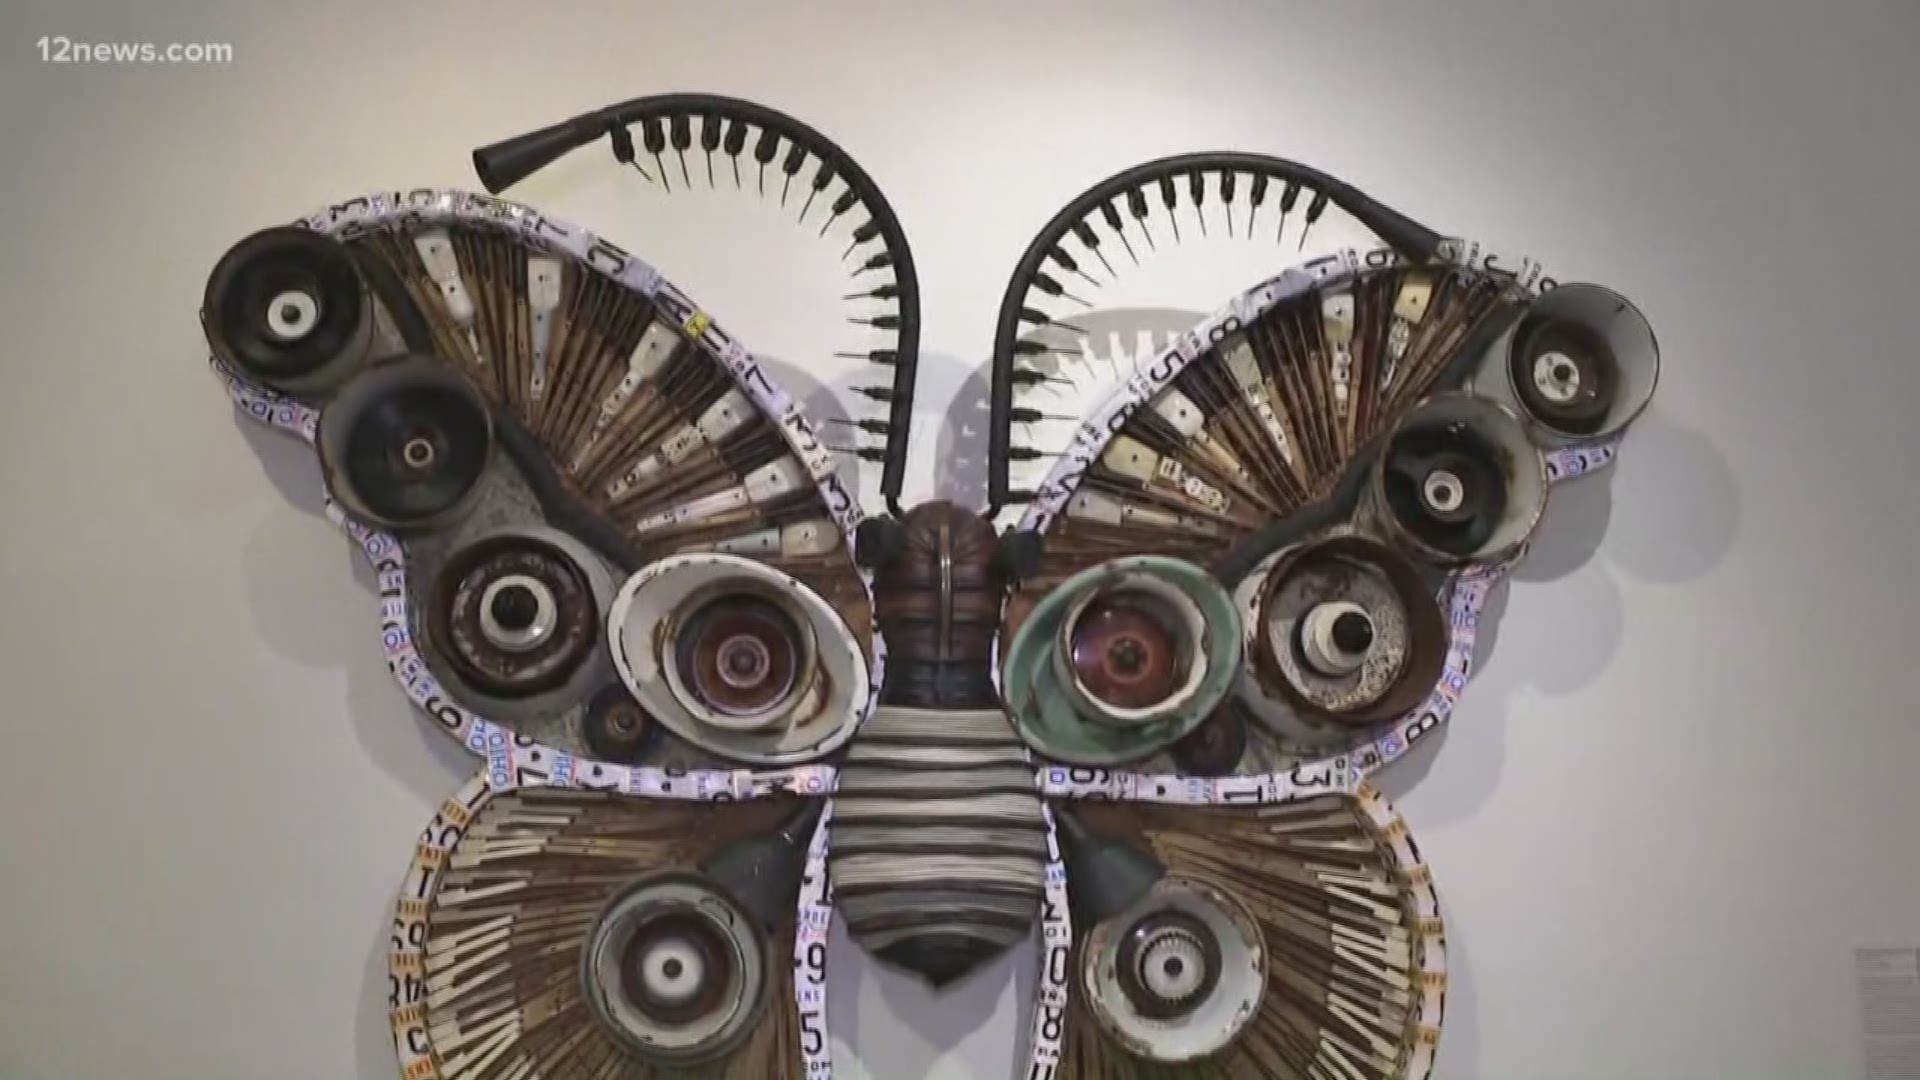 The "Junkyard Jungle" is the latest exhibit you can find at the I.D.E.A. Museum in Mesa.